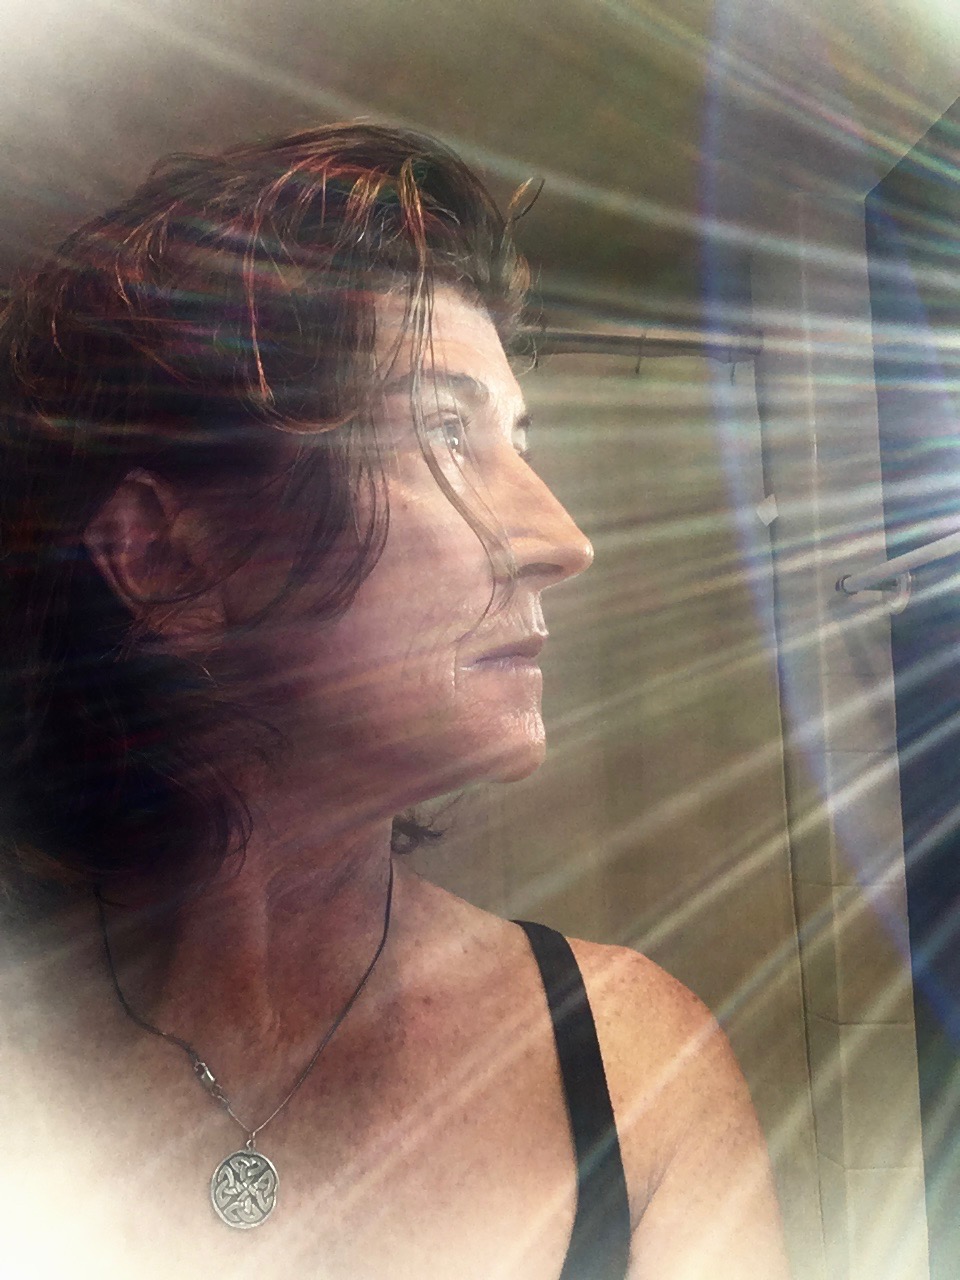 A woman looking at the sun through a window.